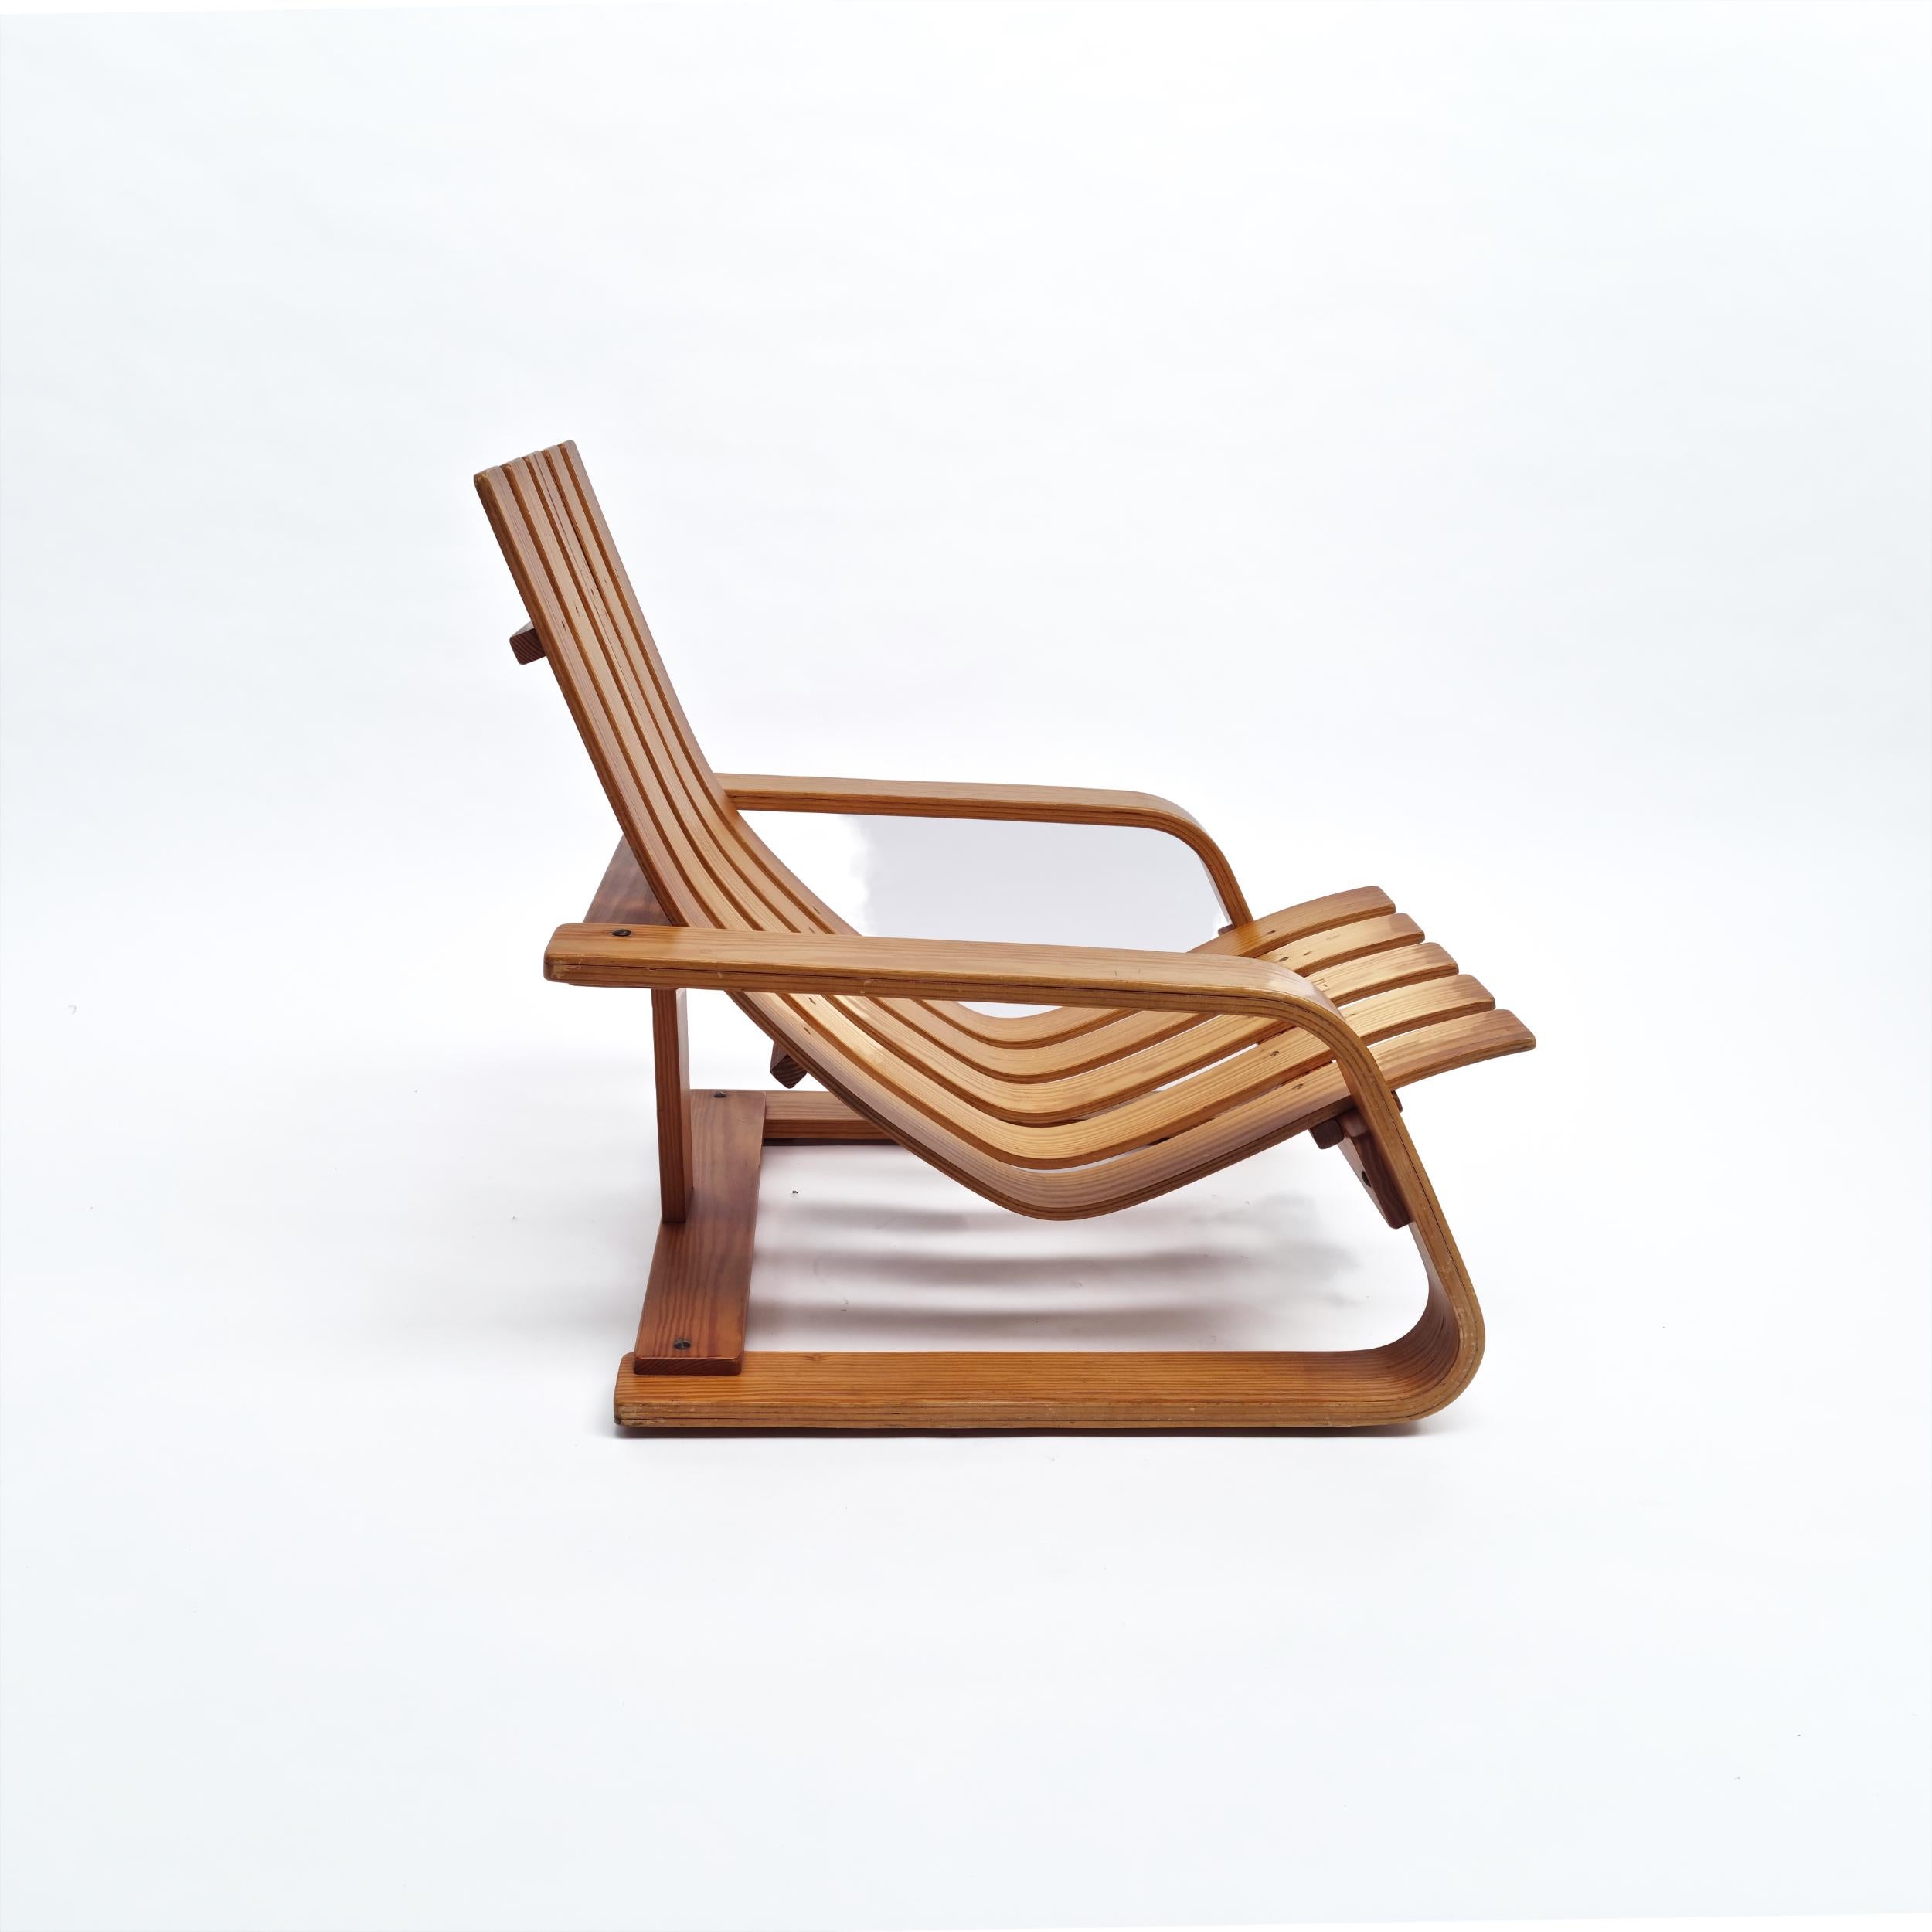 Norwegian Mid-century Lounge Chair in Solid Pine inspired by Edvin Helseth, 1960s For Sale